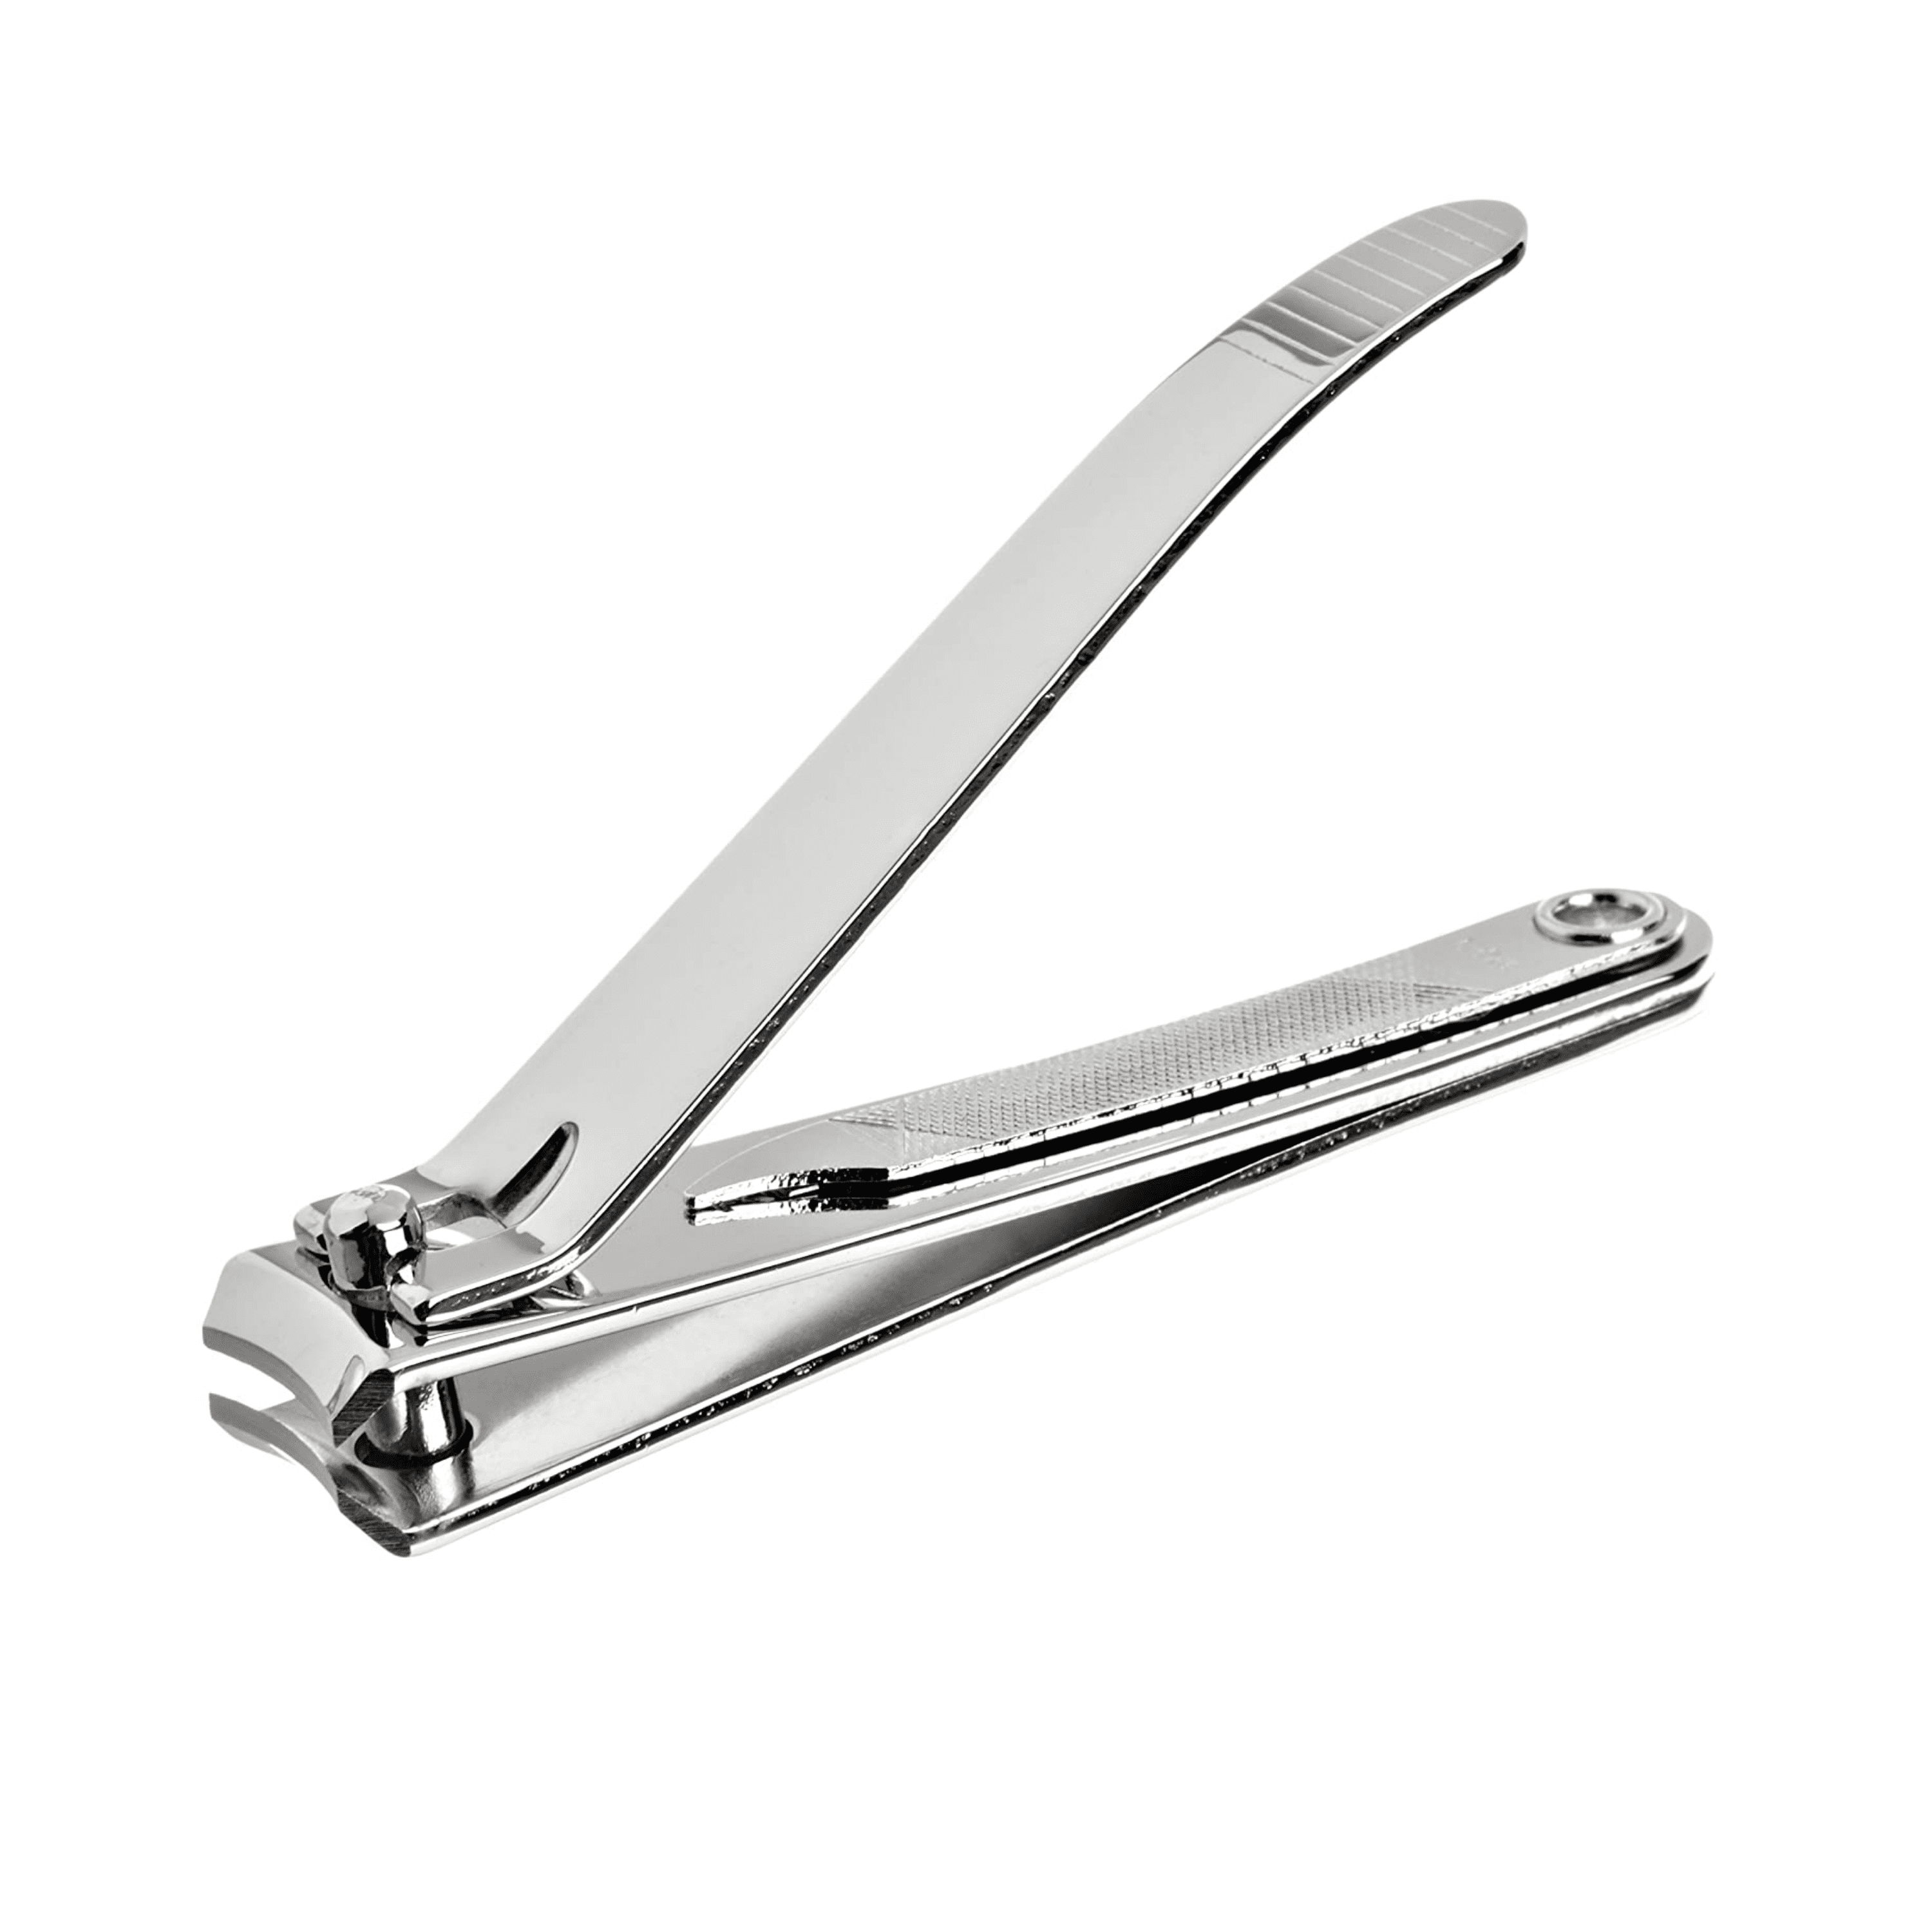 Nail Clipper Shaping Precision Stainless Steel Car Hobby Fence Holding Tweezers 